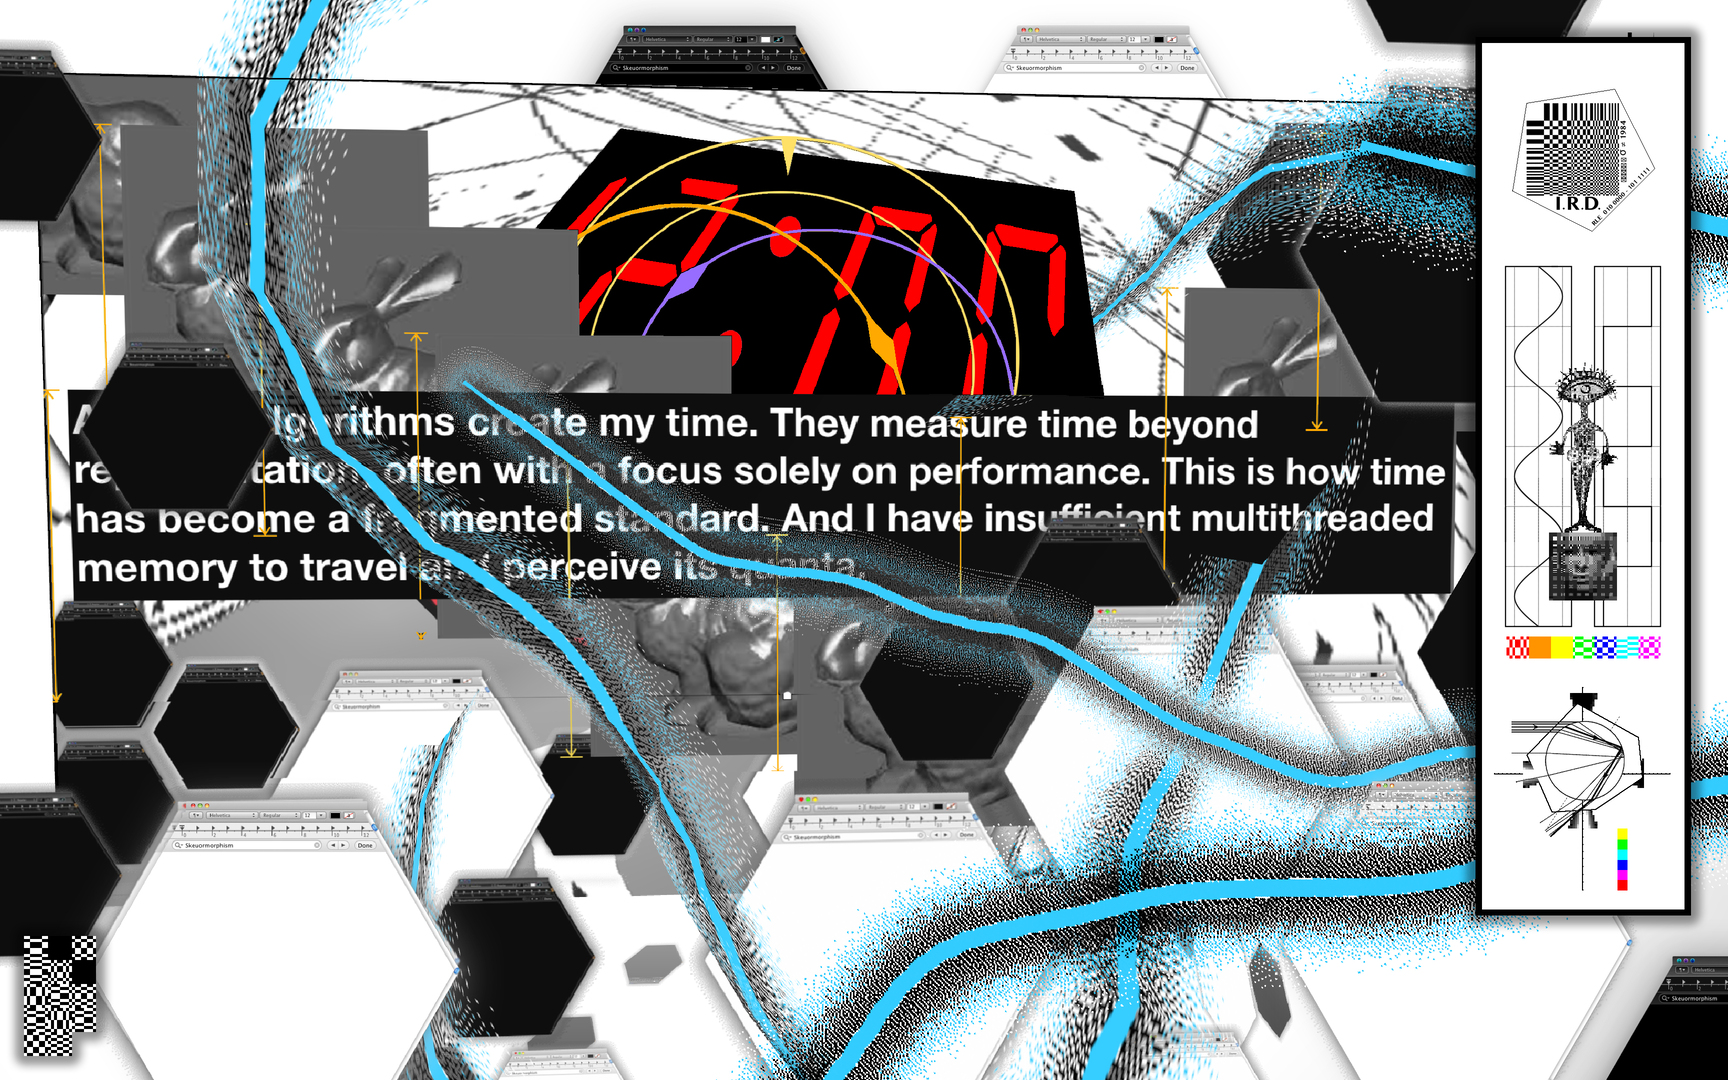 A black and white digital collage with lots of hexagons, text, blue scribbles, and a block of text about time and algorithms that is partially obscured